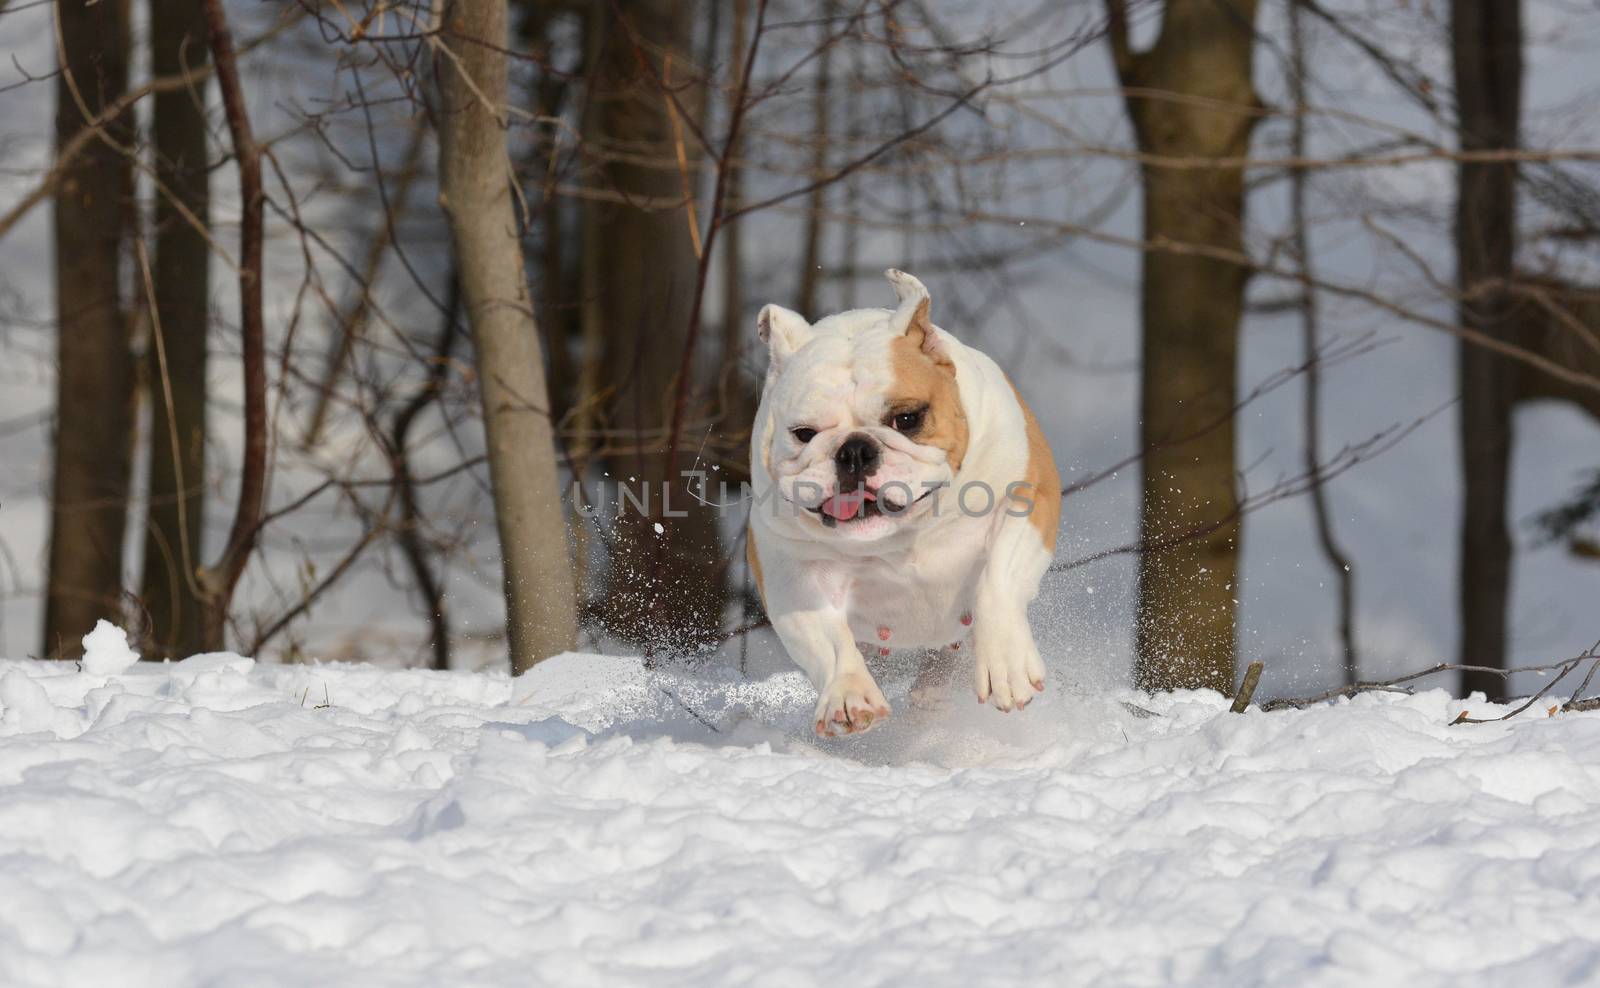 bulldog running in the snow by willeecole123